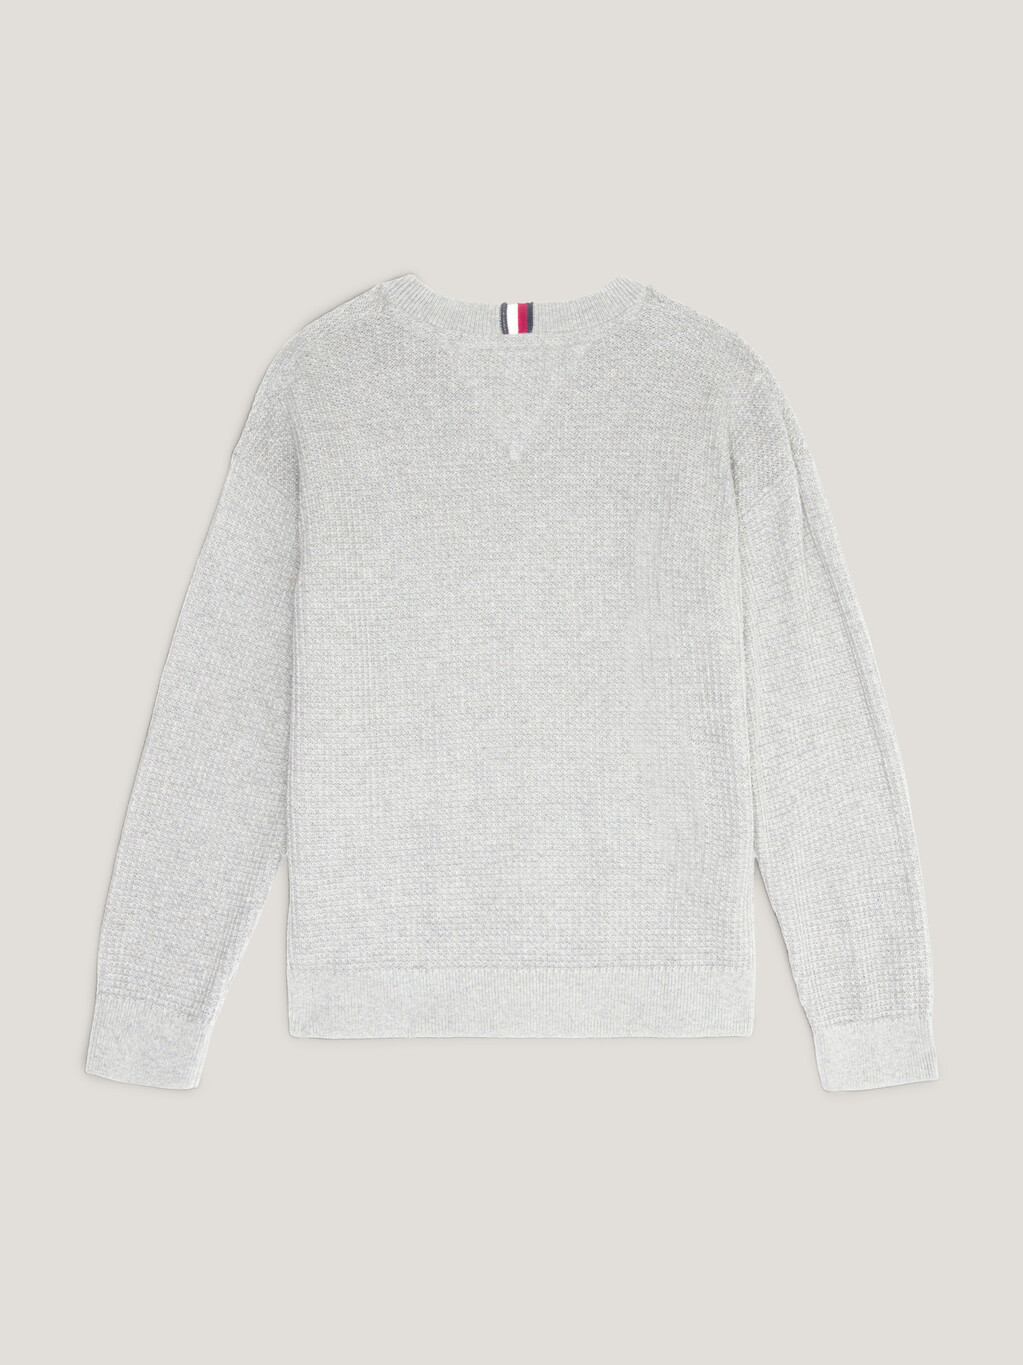 Boys Essential Knit Sweater, New Light Grey Heather, hi-res